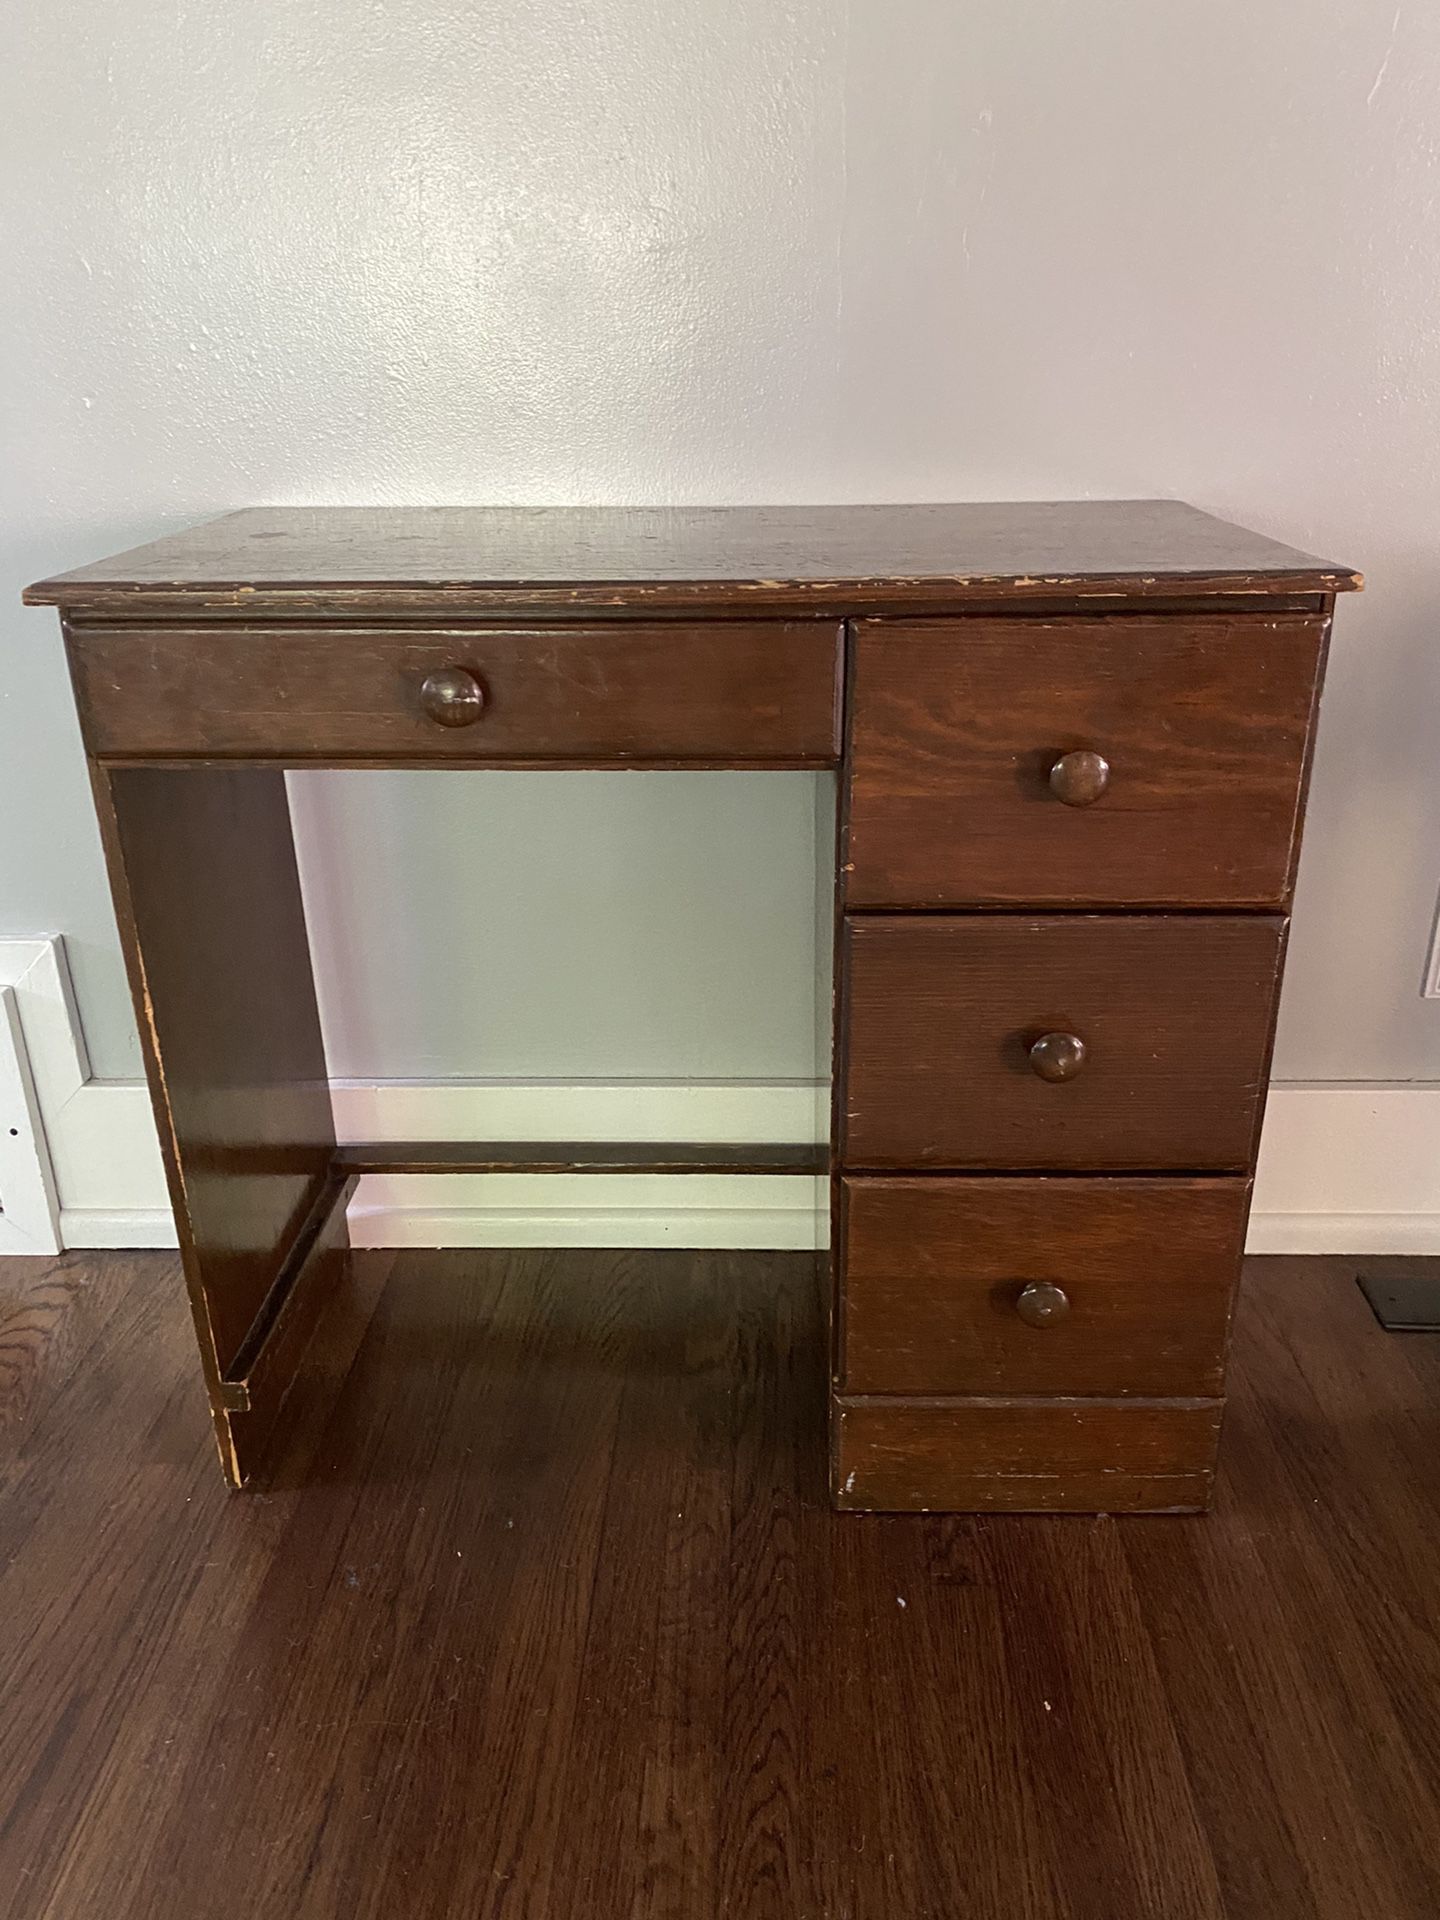 Pending pick up -Small Wooden Desk